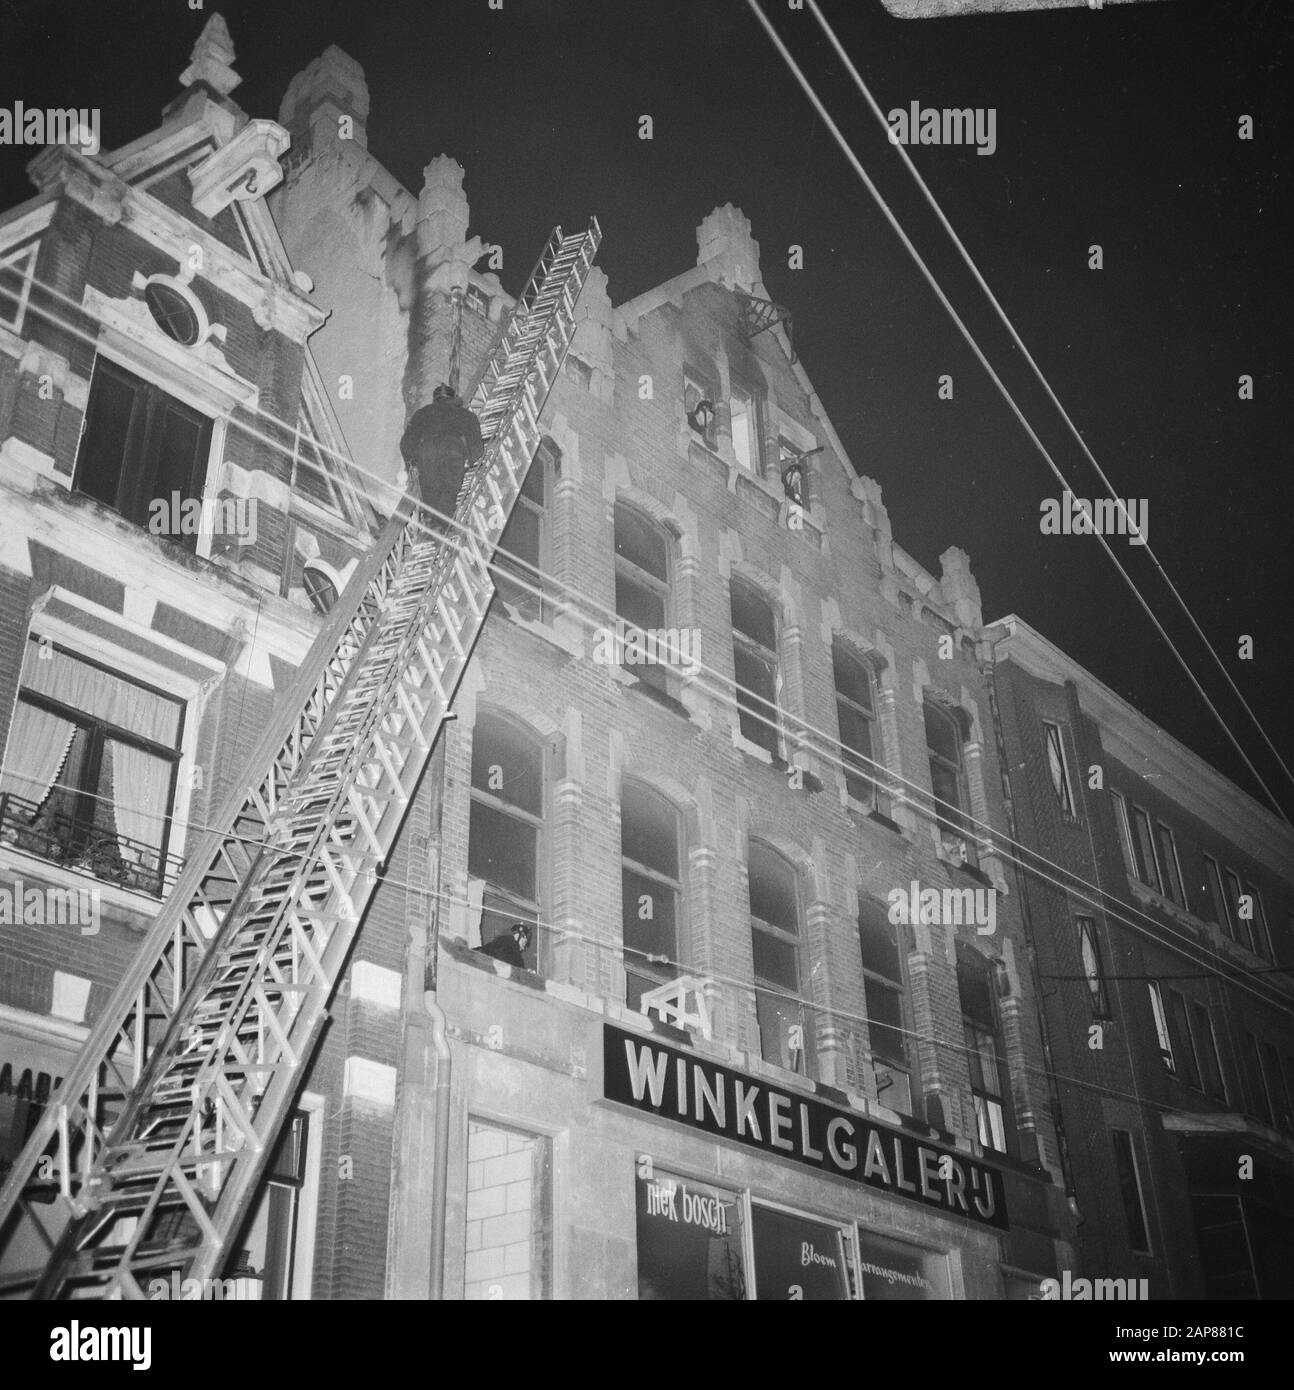 Brand aan Amstel number 50 above shopping gallery. Fire brigade during extinguishing Date: January 2, 1968 Keywords: FIRE, extinguishing, fires, galleries, shops Personal name: Amstel Stock Photo